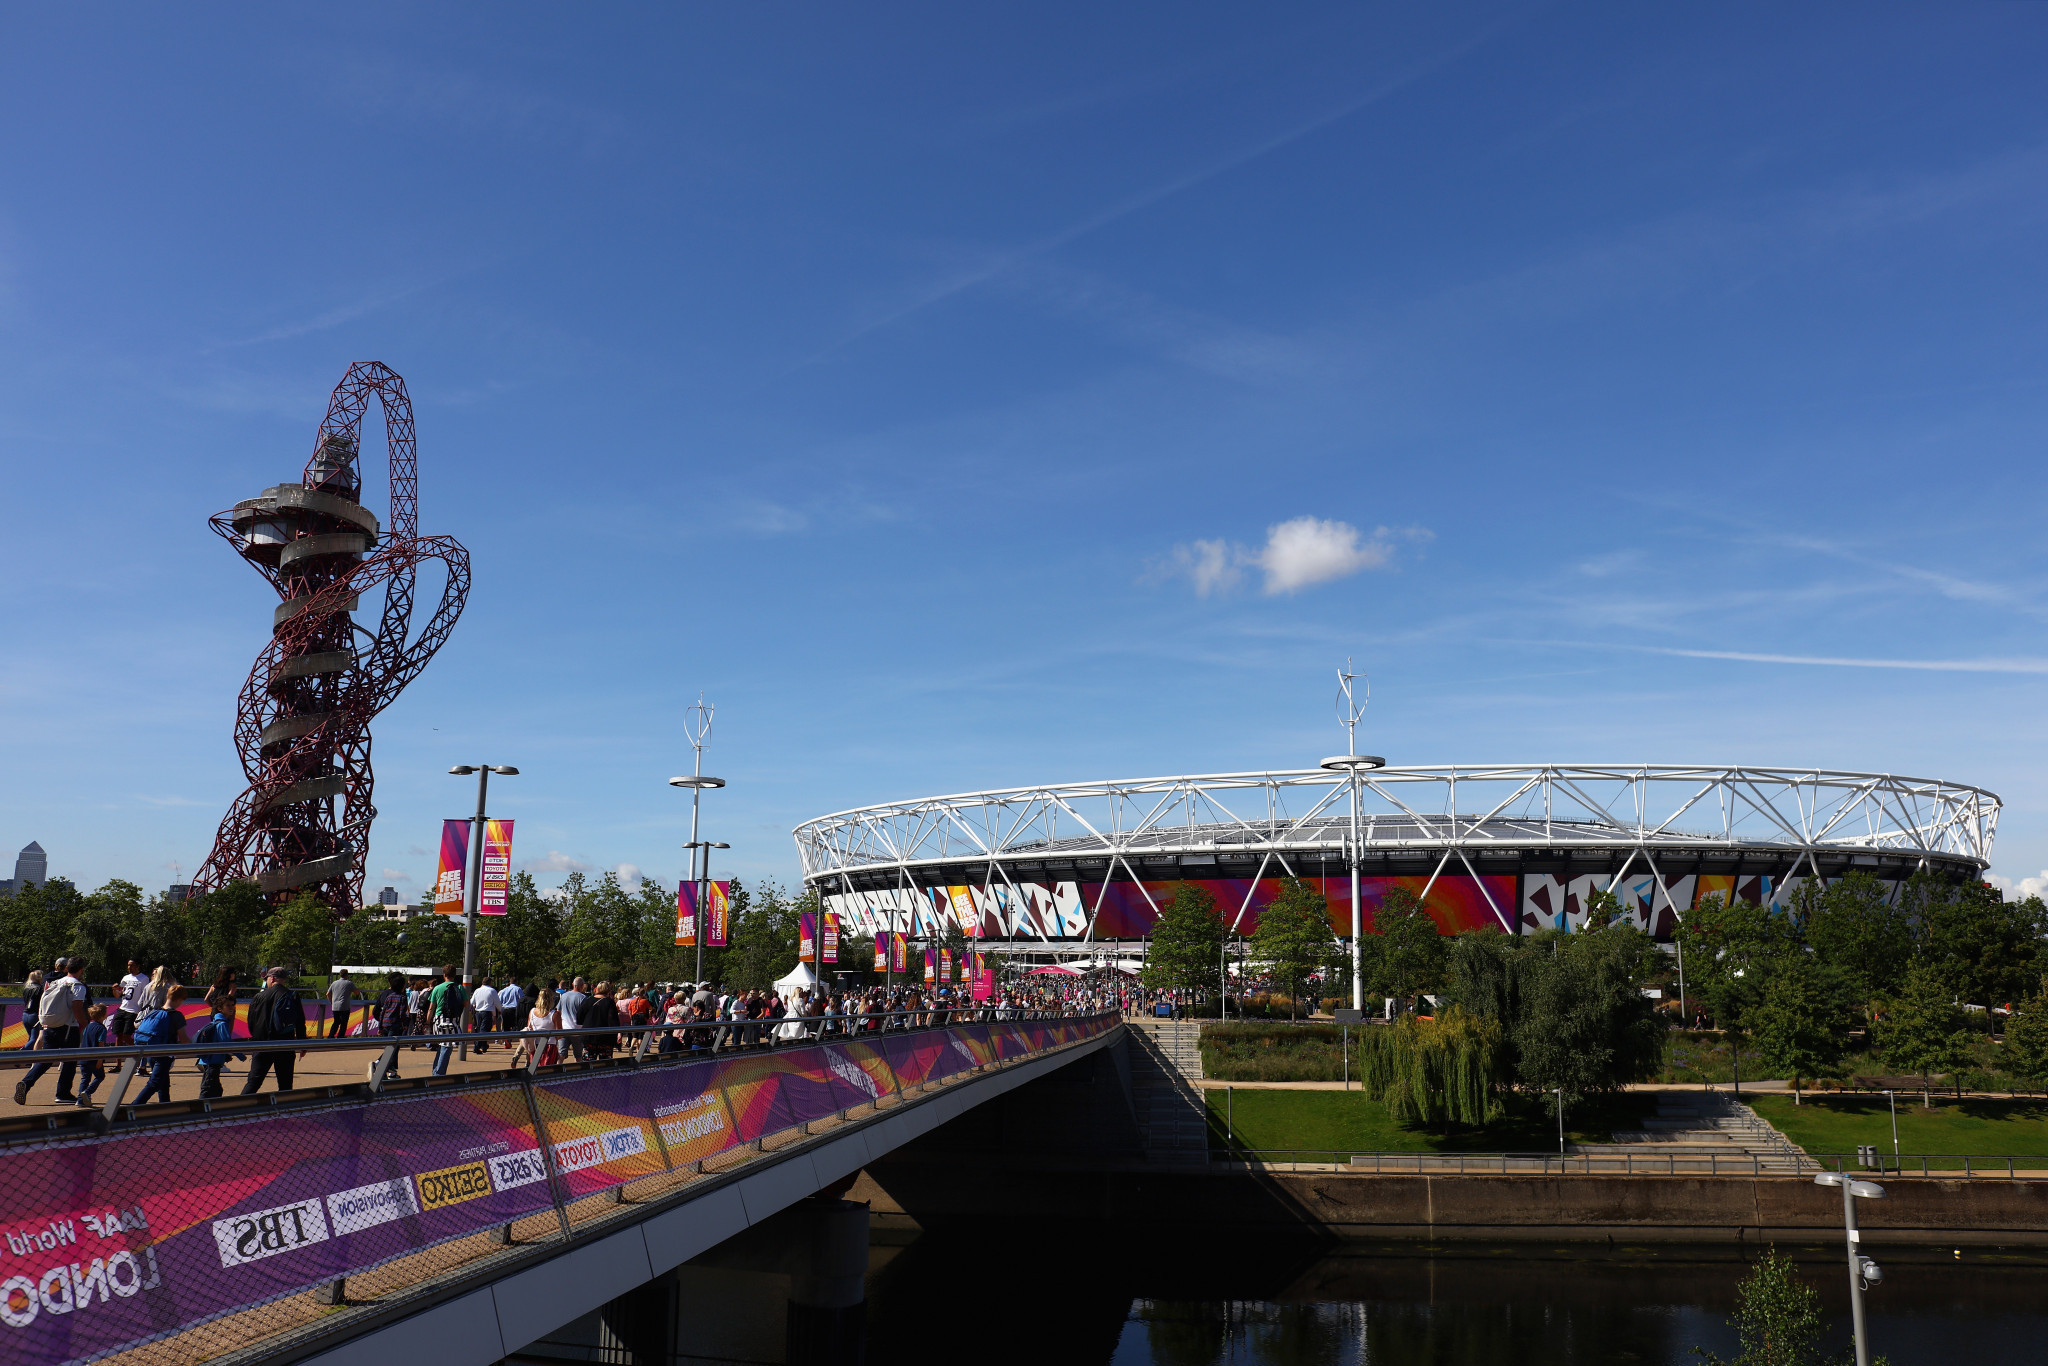 Colleen Wrenn helped with preparations for a number of sporting events including the London 2012 Olympics and Paralympics ©Getty Images